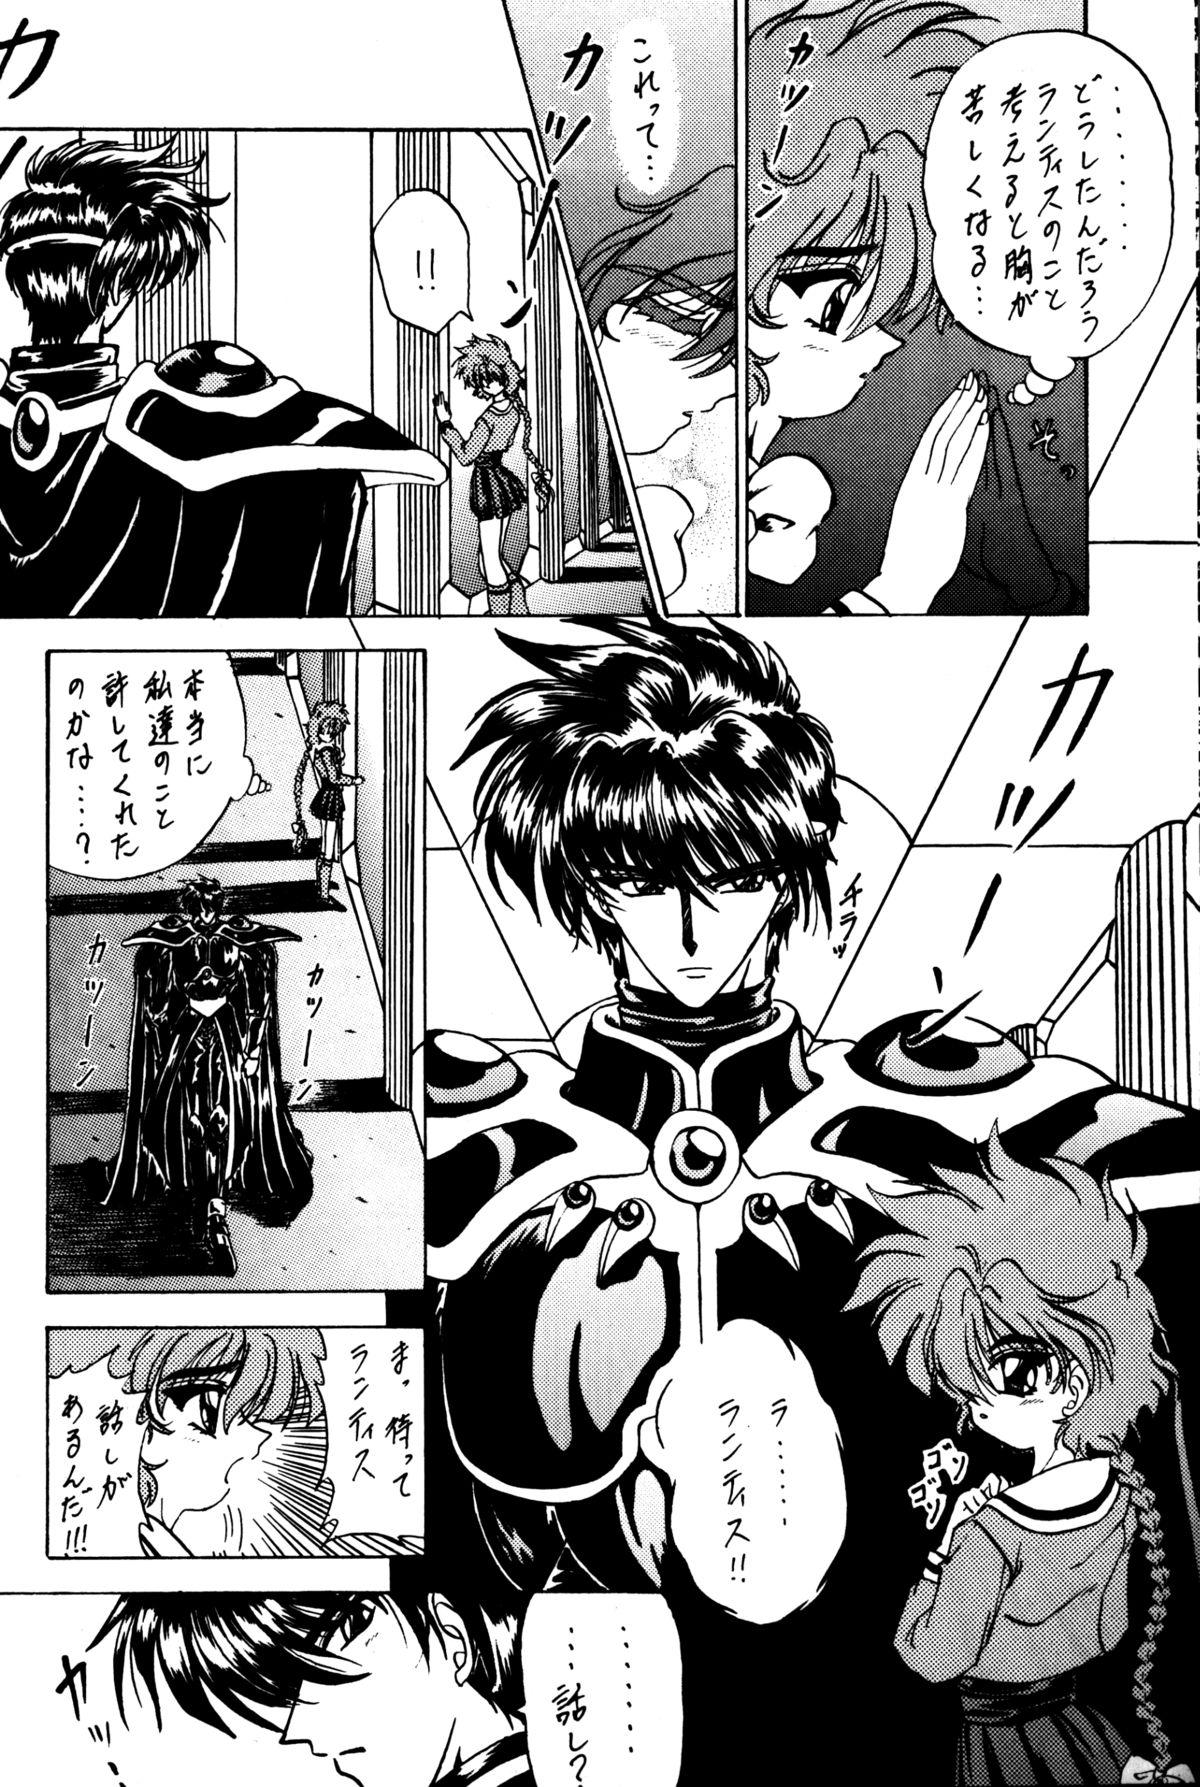 Ass Sex Stale World II - Magic knight rayearth Gay Public - Page 5